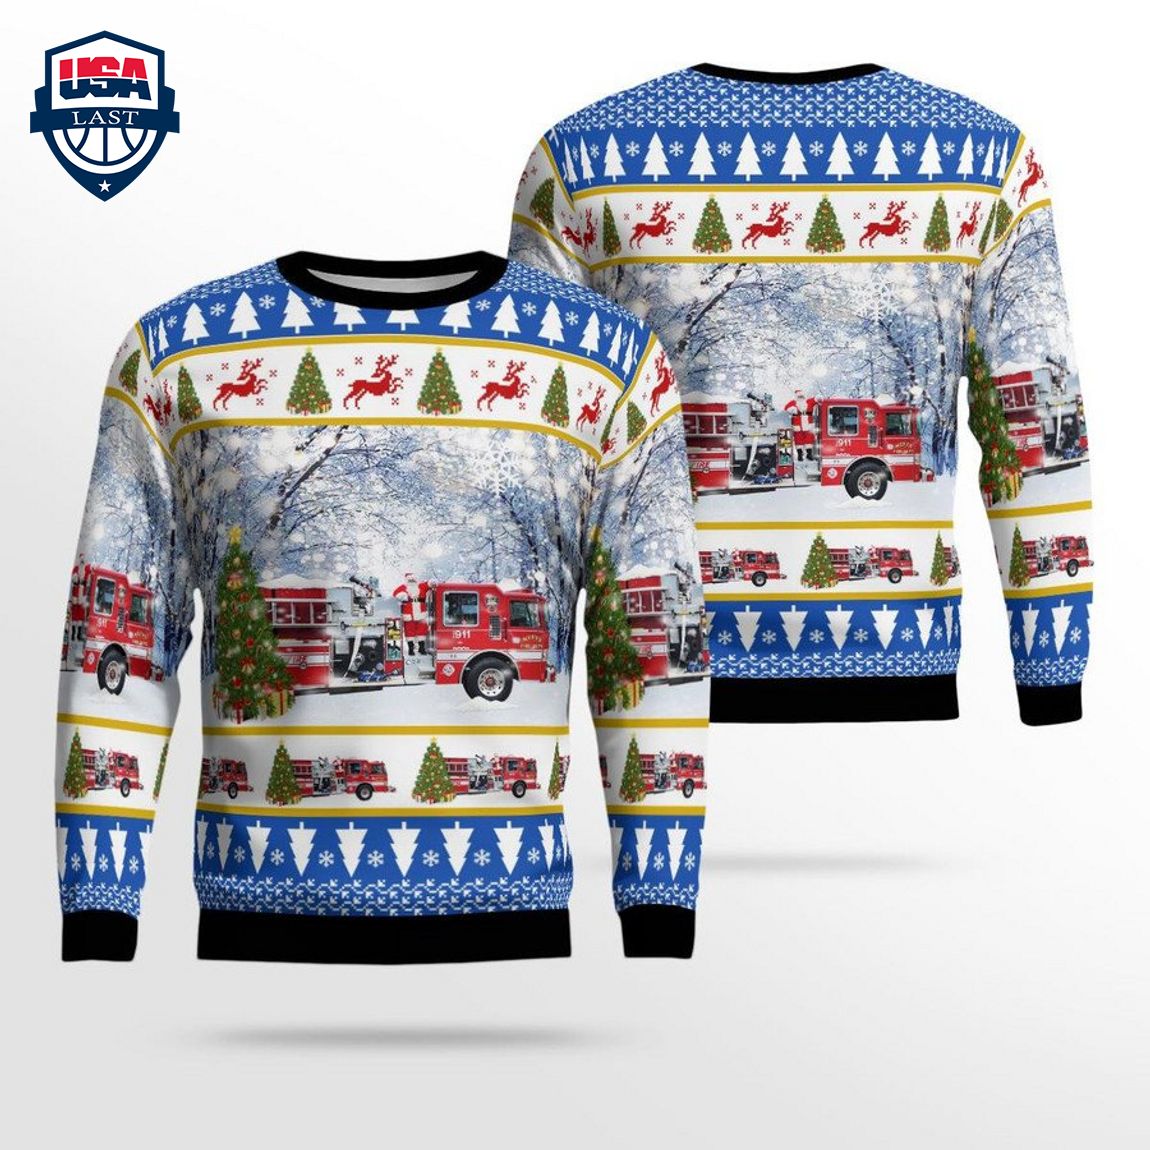 Ohio Neffs Fire Department 3D Christmas Sweater - Stand easy bro